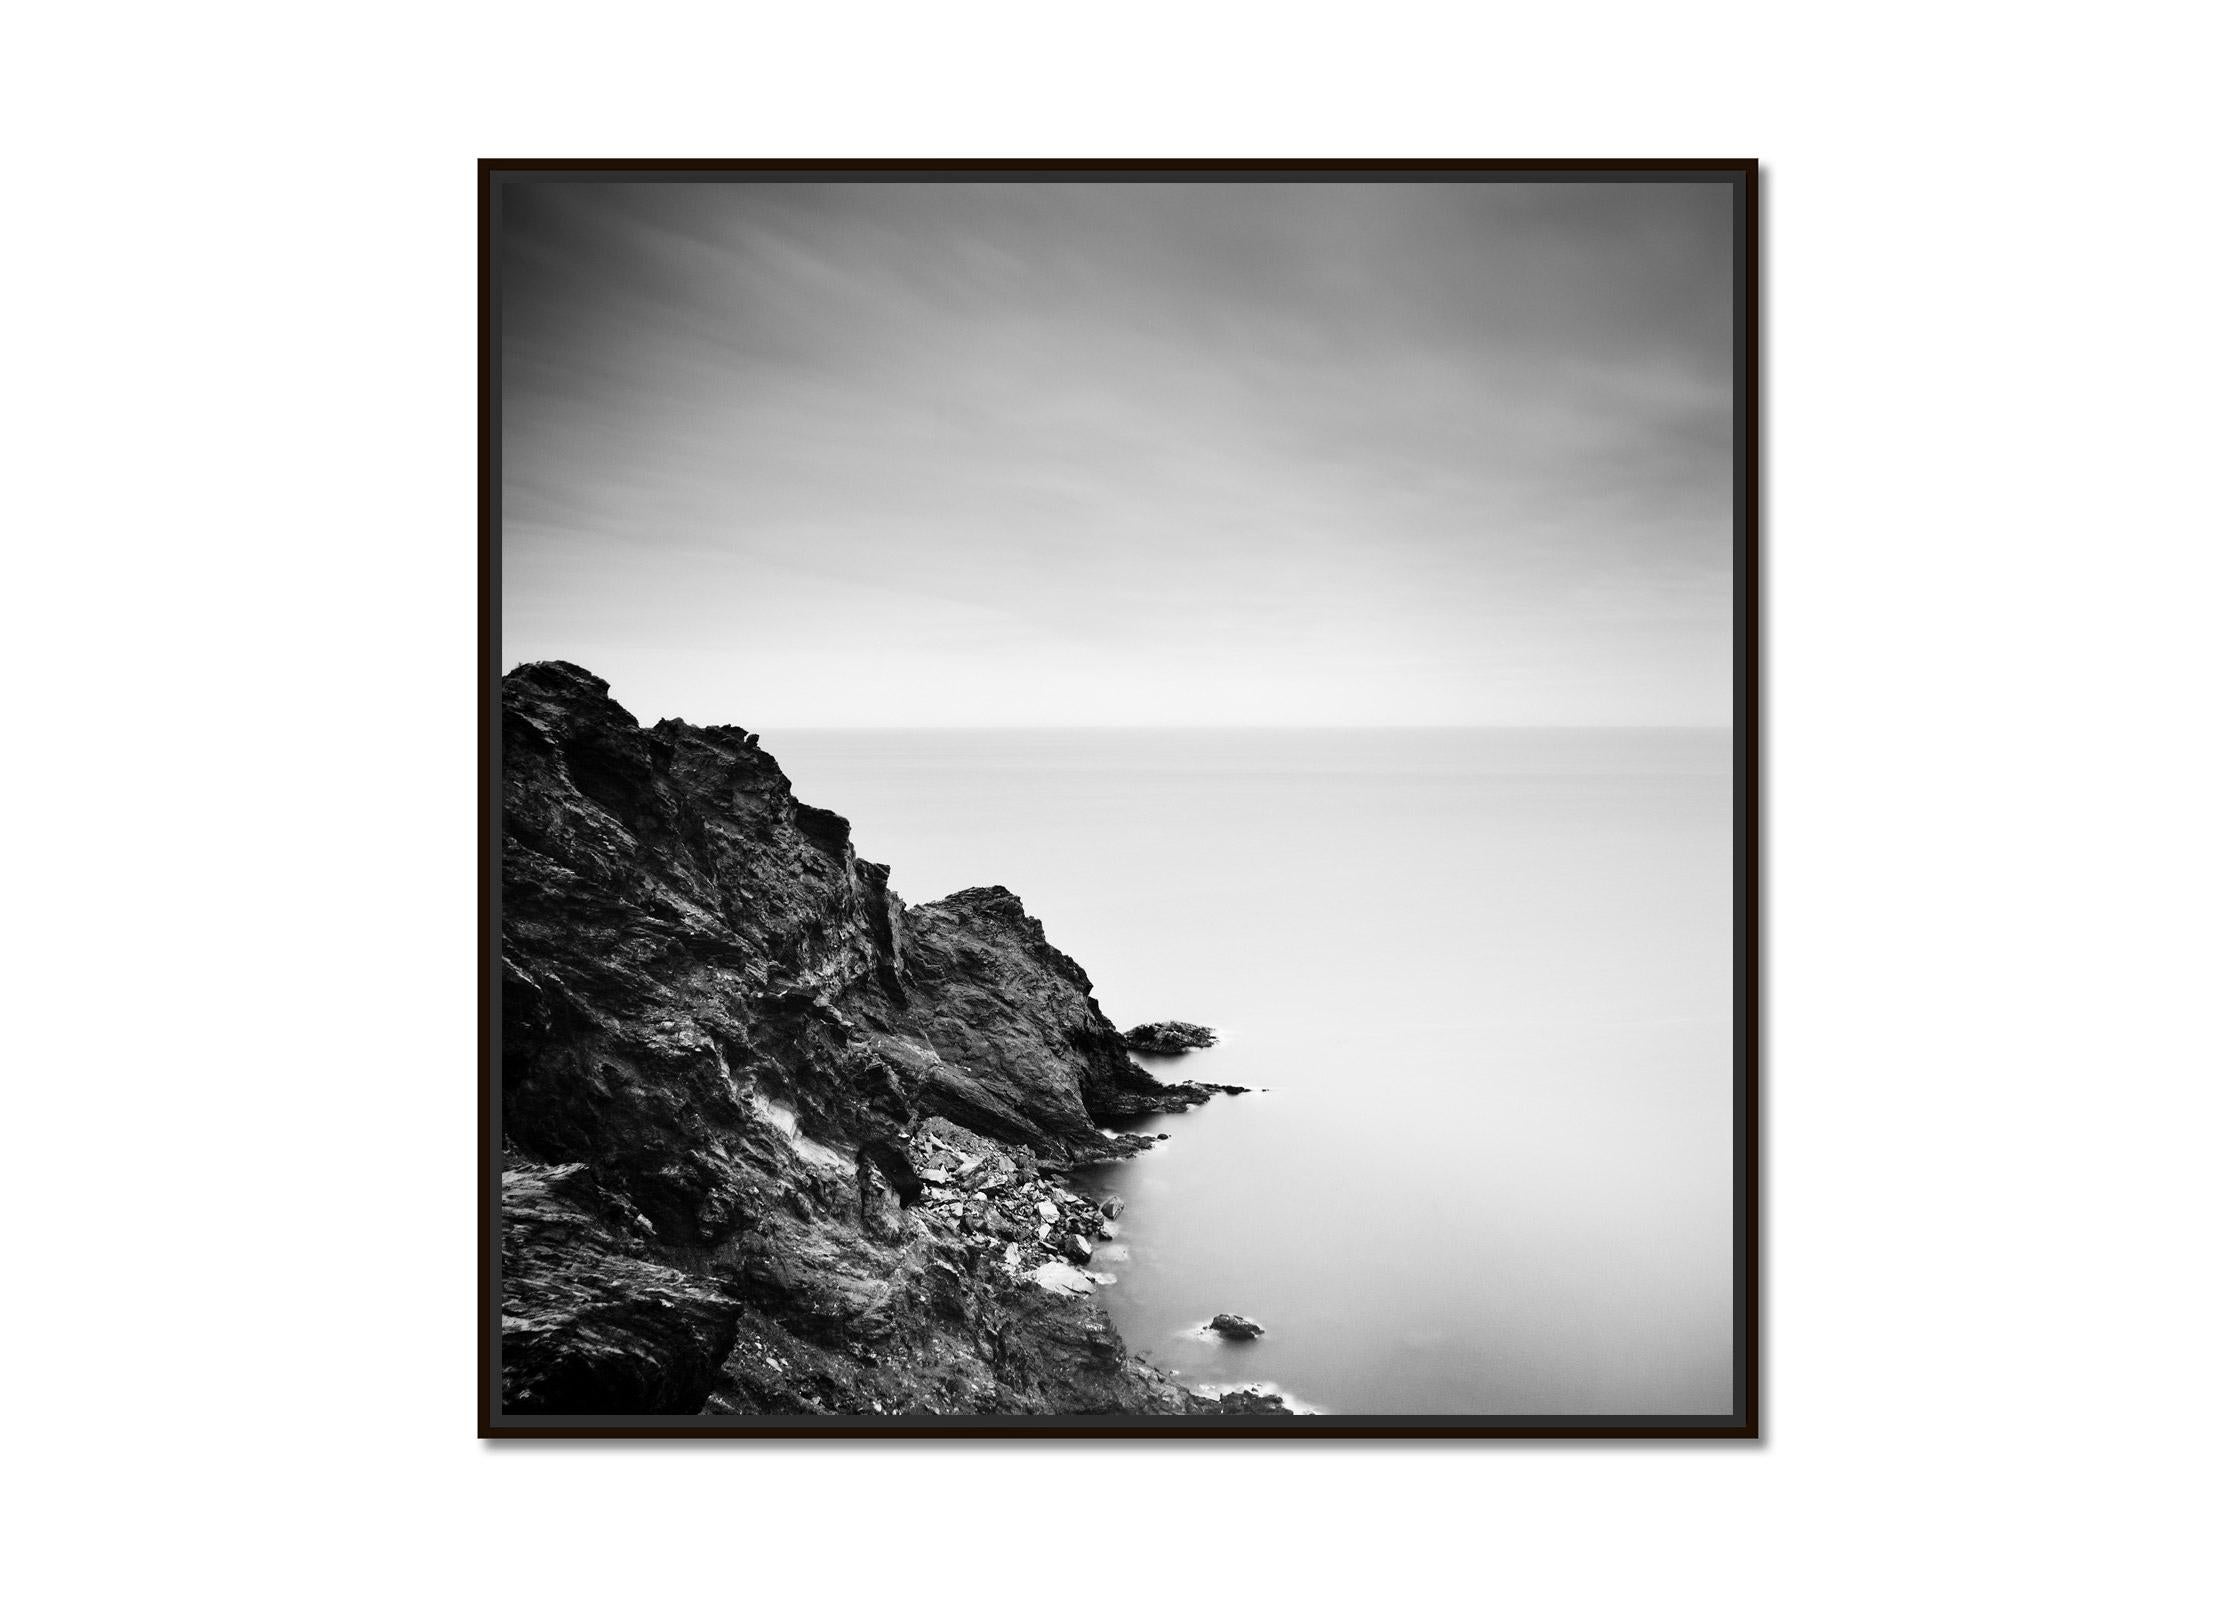 Atlantic Coast, Cliff, Portugal, black and white photography, fine art landscape - Photograph by Gerald Berghammer, Ina Forstinger